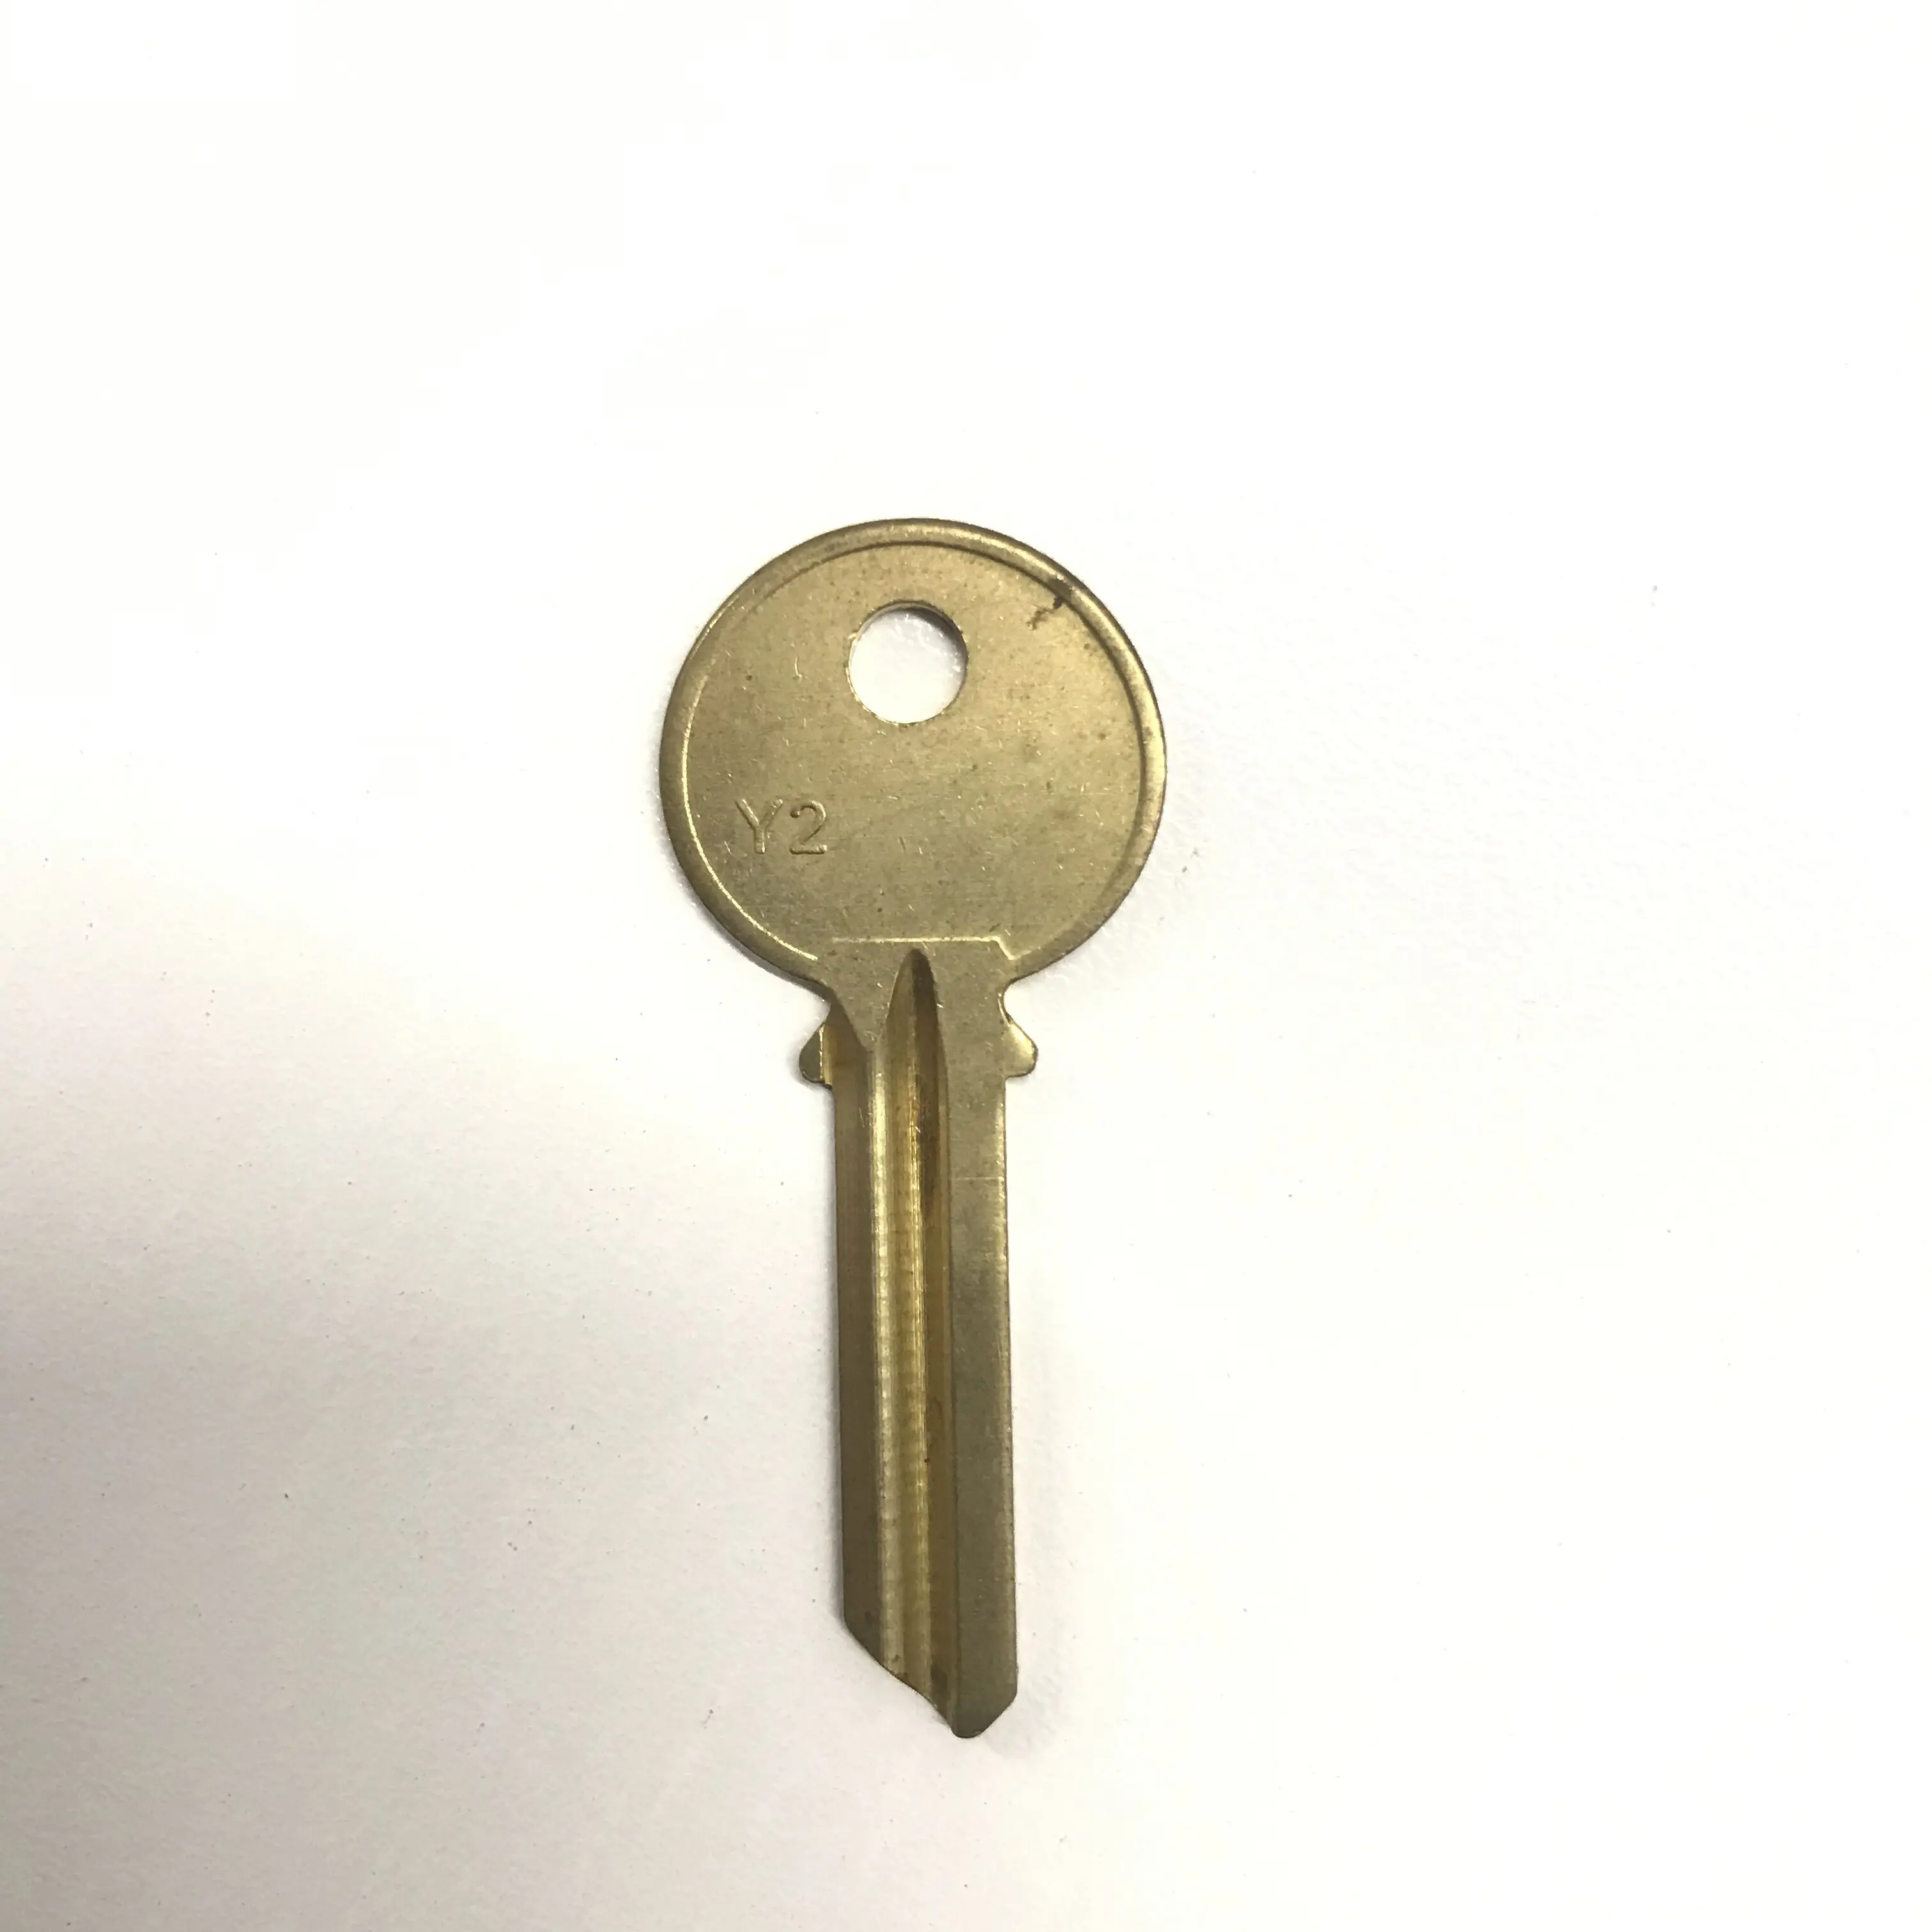 

High quality low price residential brass blank key Y2 for household locksmiths supplies at factory prices, Shown